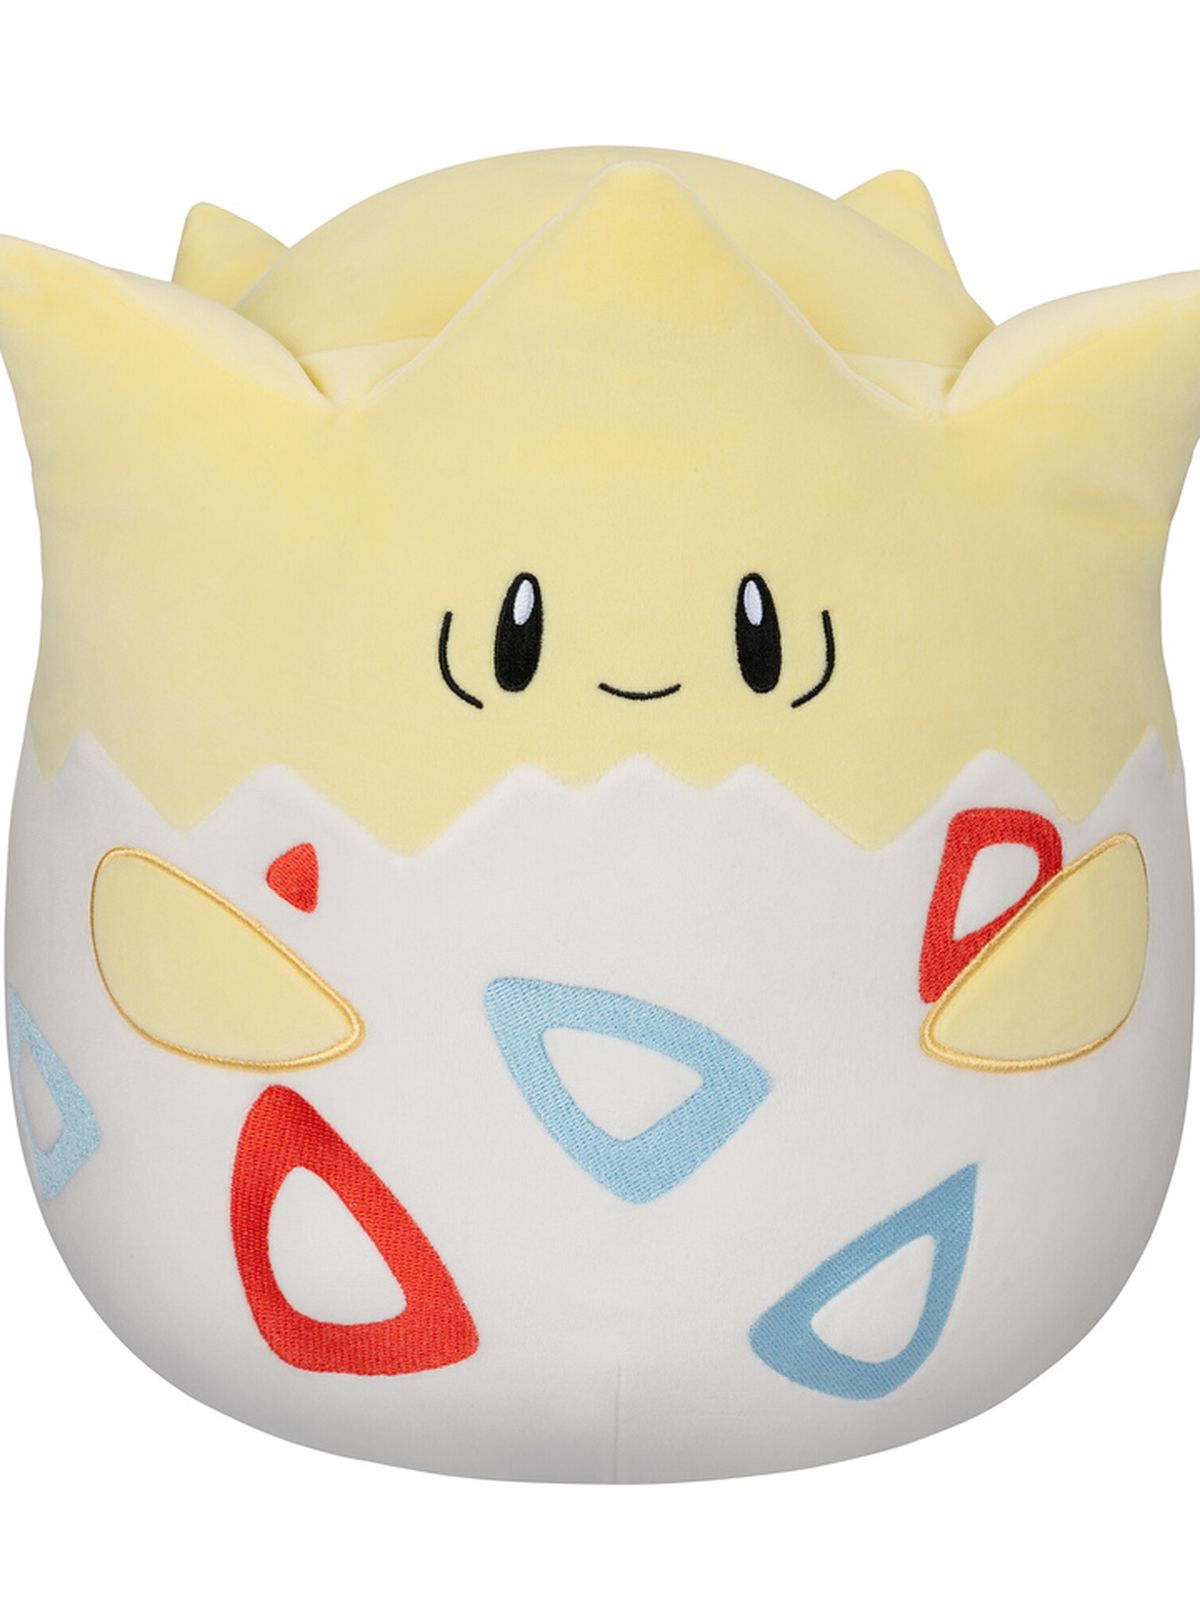 Togepi Squishmallow, a round egg